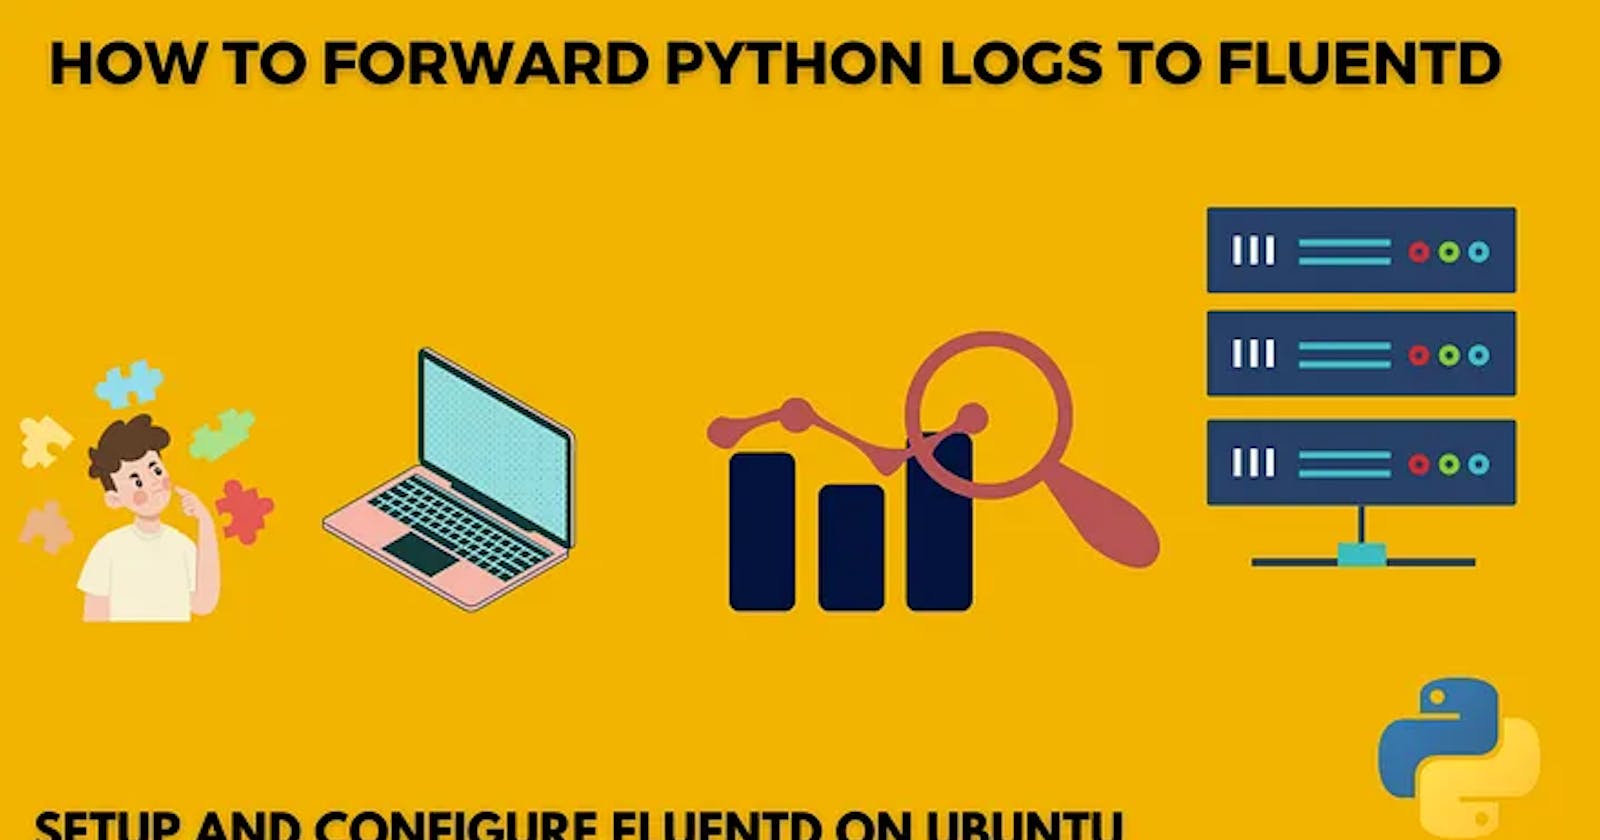 Set up a Unified Logging Layer for Your Python Applications